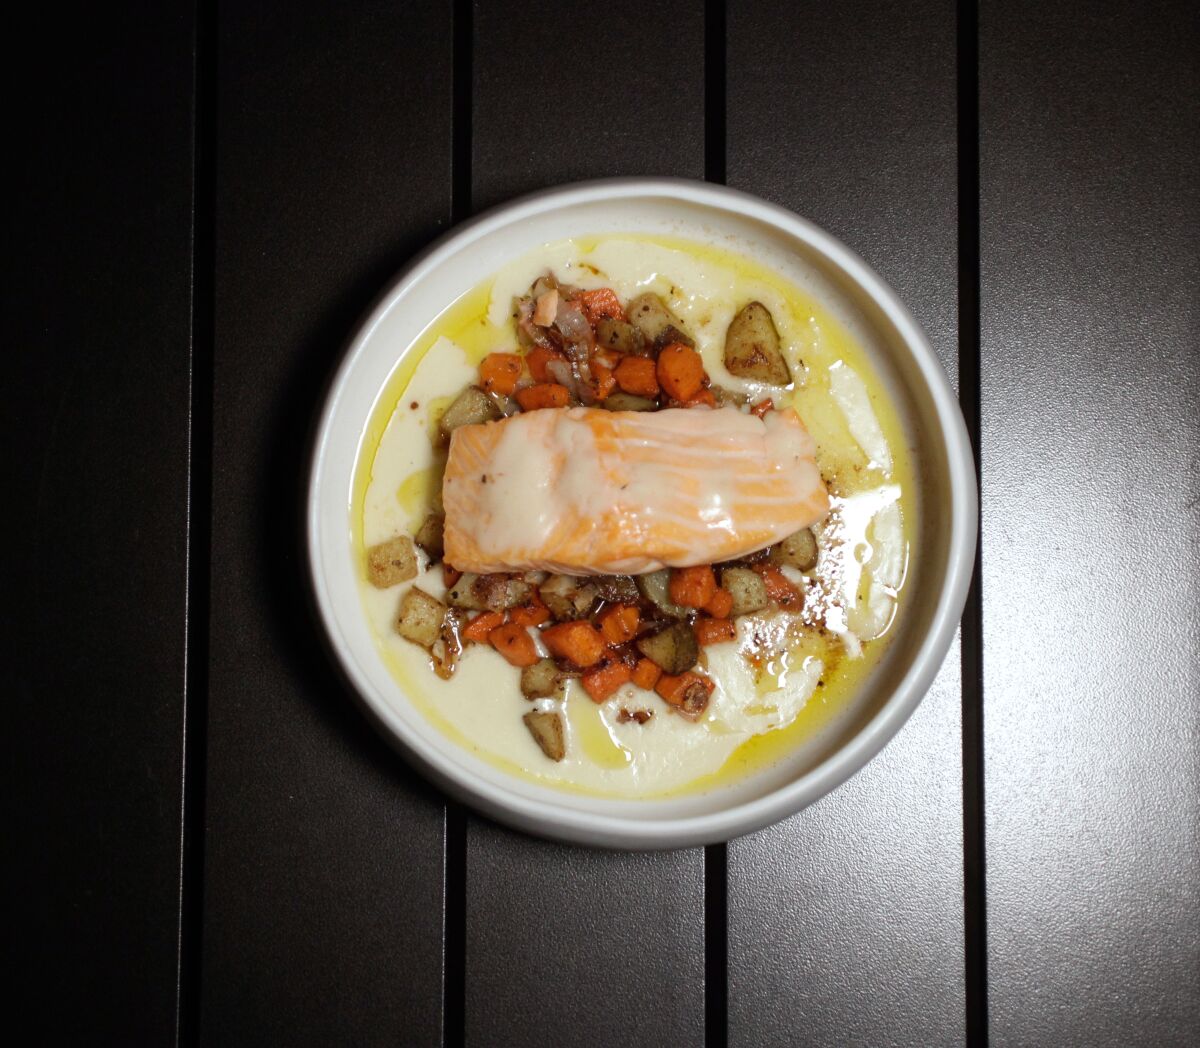 A photo of salmon dinner from Luca at The Guild Hotel